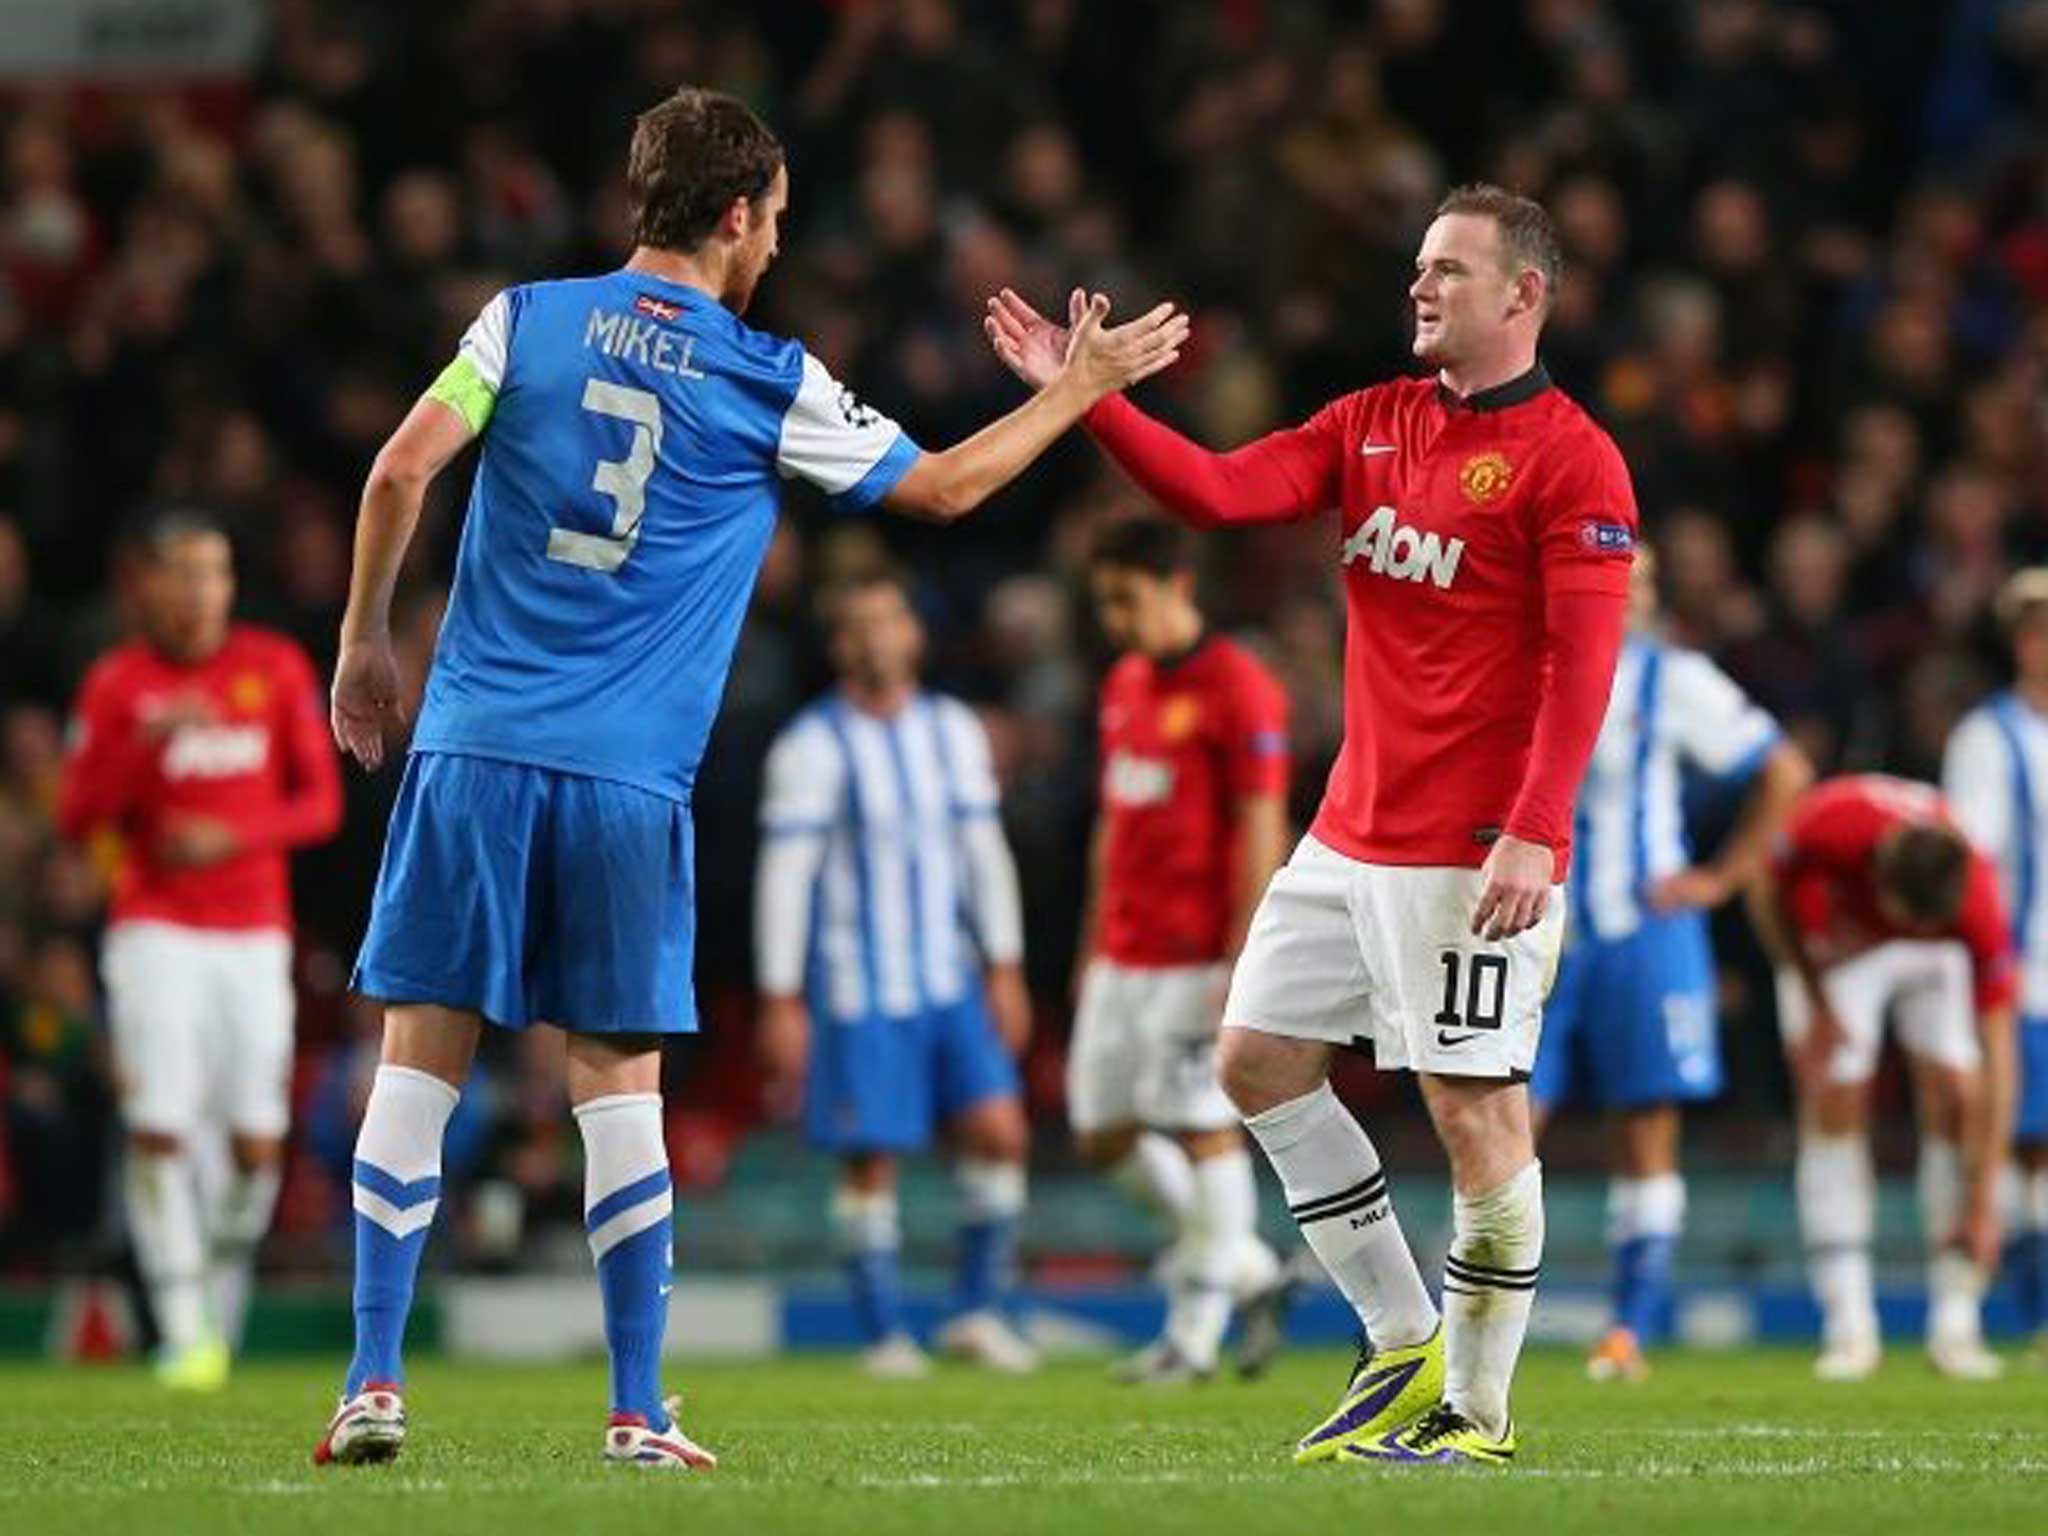 Wayne Rooney of Manchester United shakes hands with Mikel Gonzalez of Real Sociedad at the end of the UEFA Champions League Group A match 